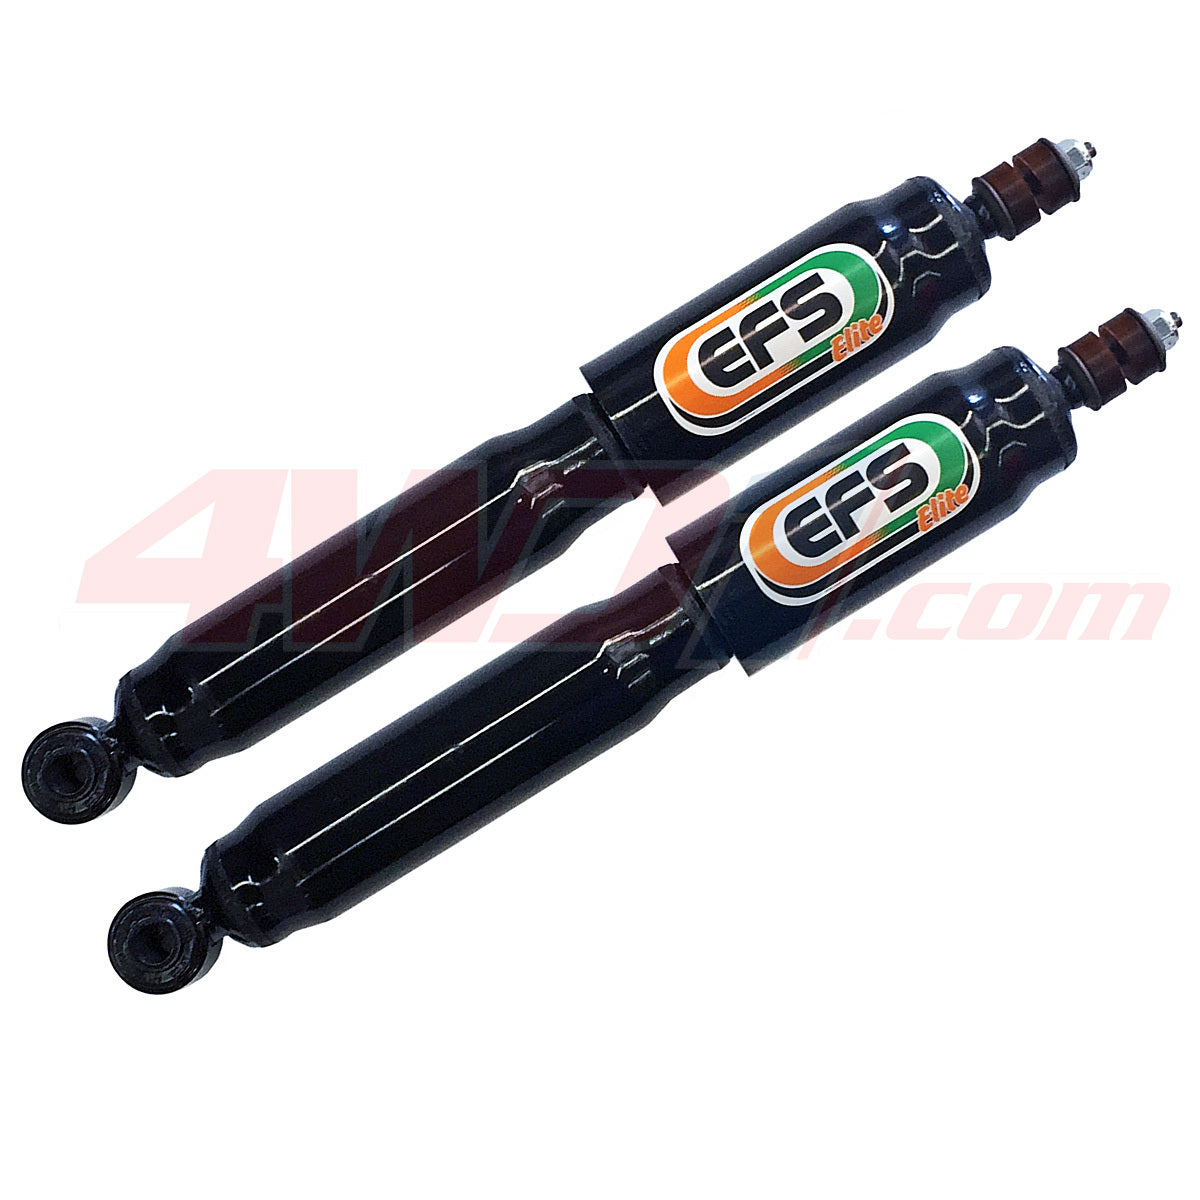 EFS ELITE FRONT SHOCKS FOR GREAT WALL X200/X240